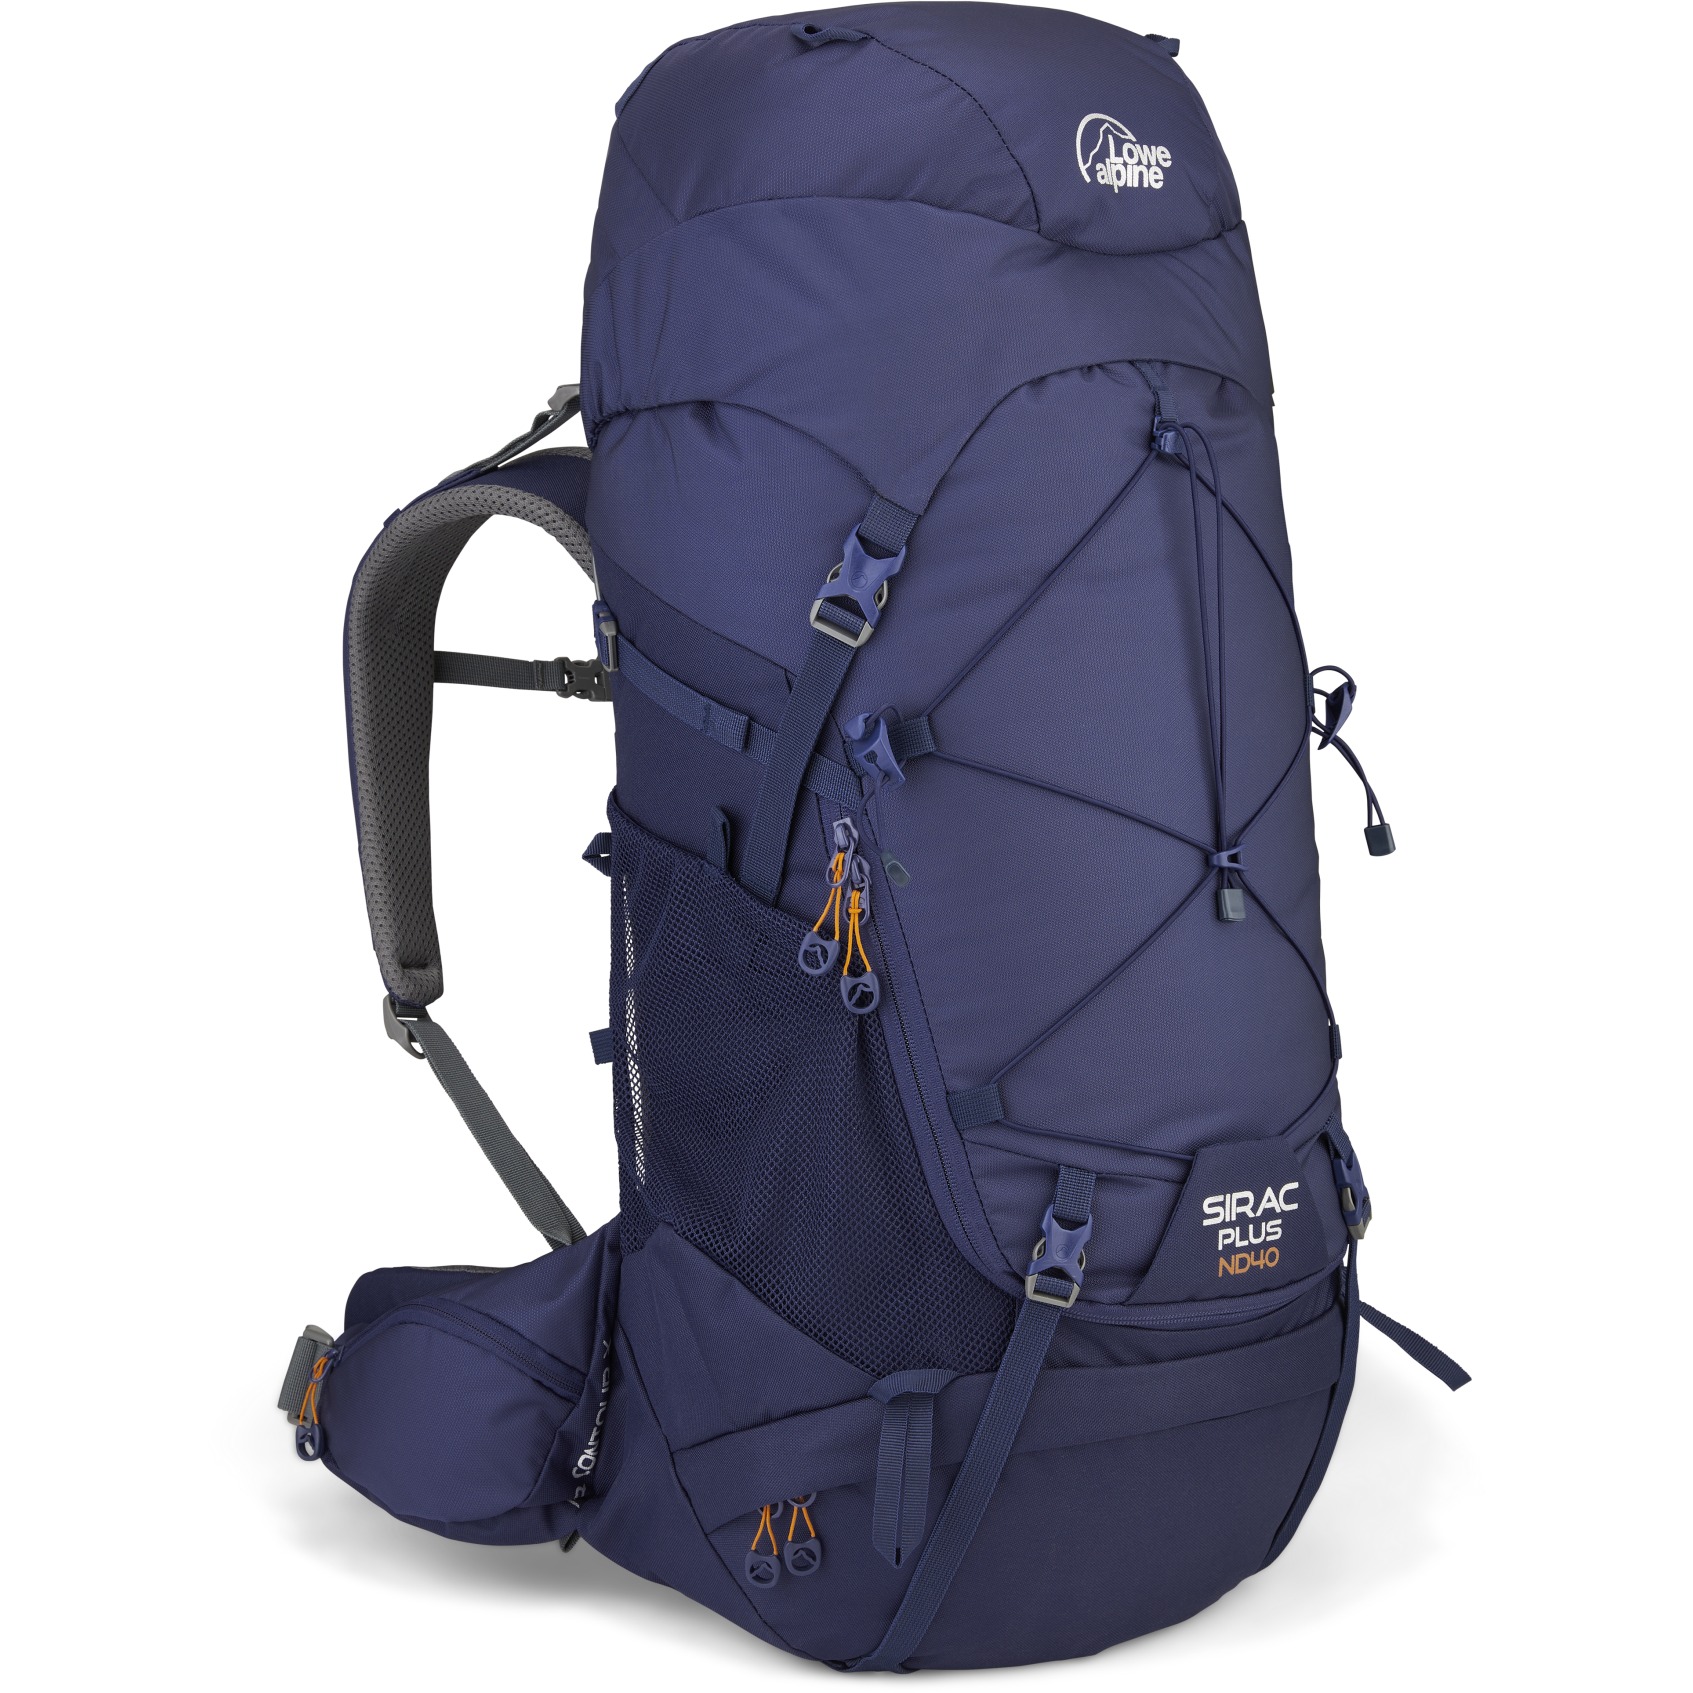 Image of Lowe Alpine Sirac Plus ND40L Women's Backpack - S/M - Patriot Blue